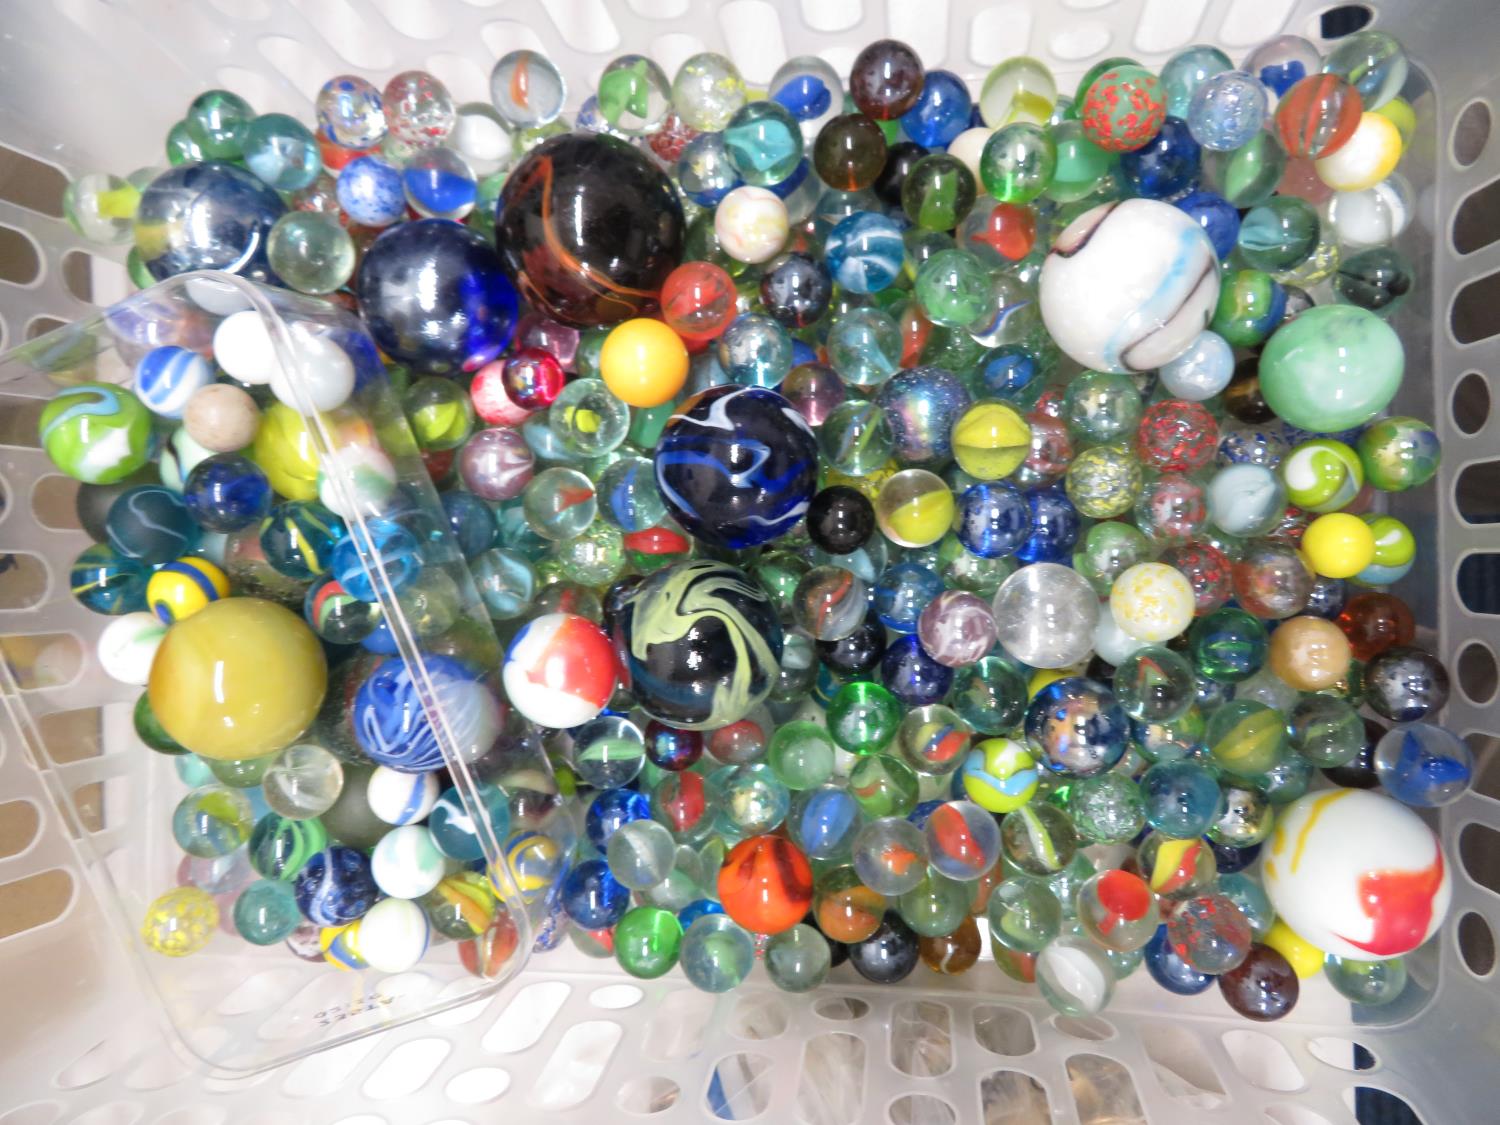 Large collection of marbles